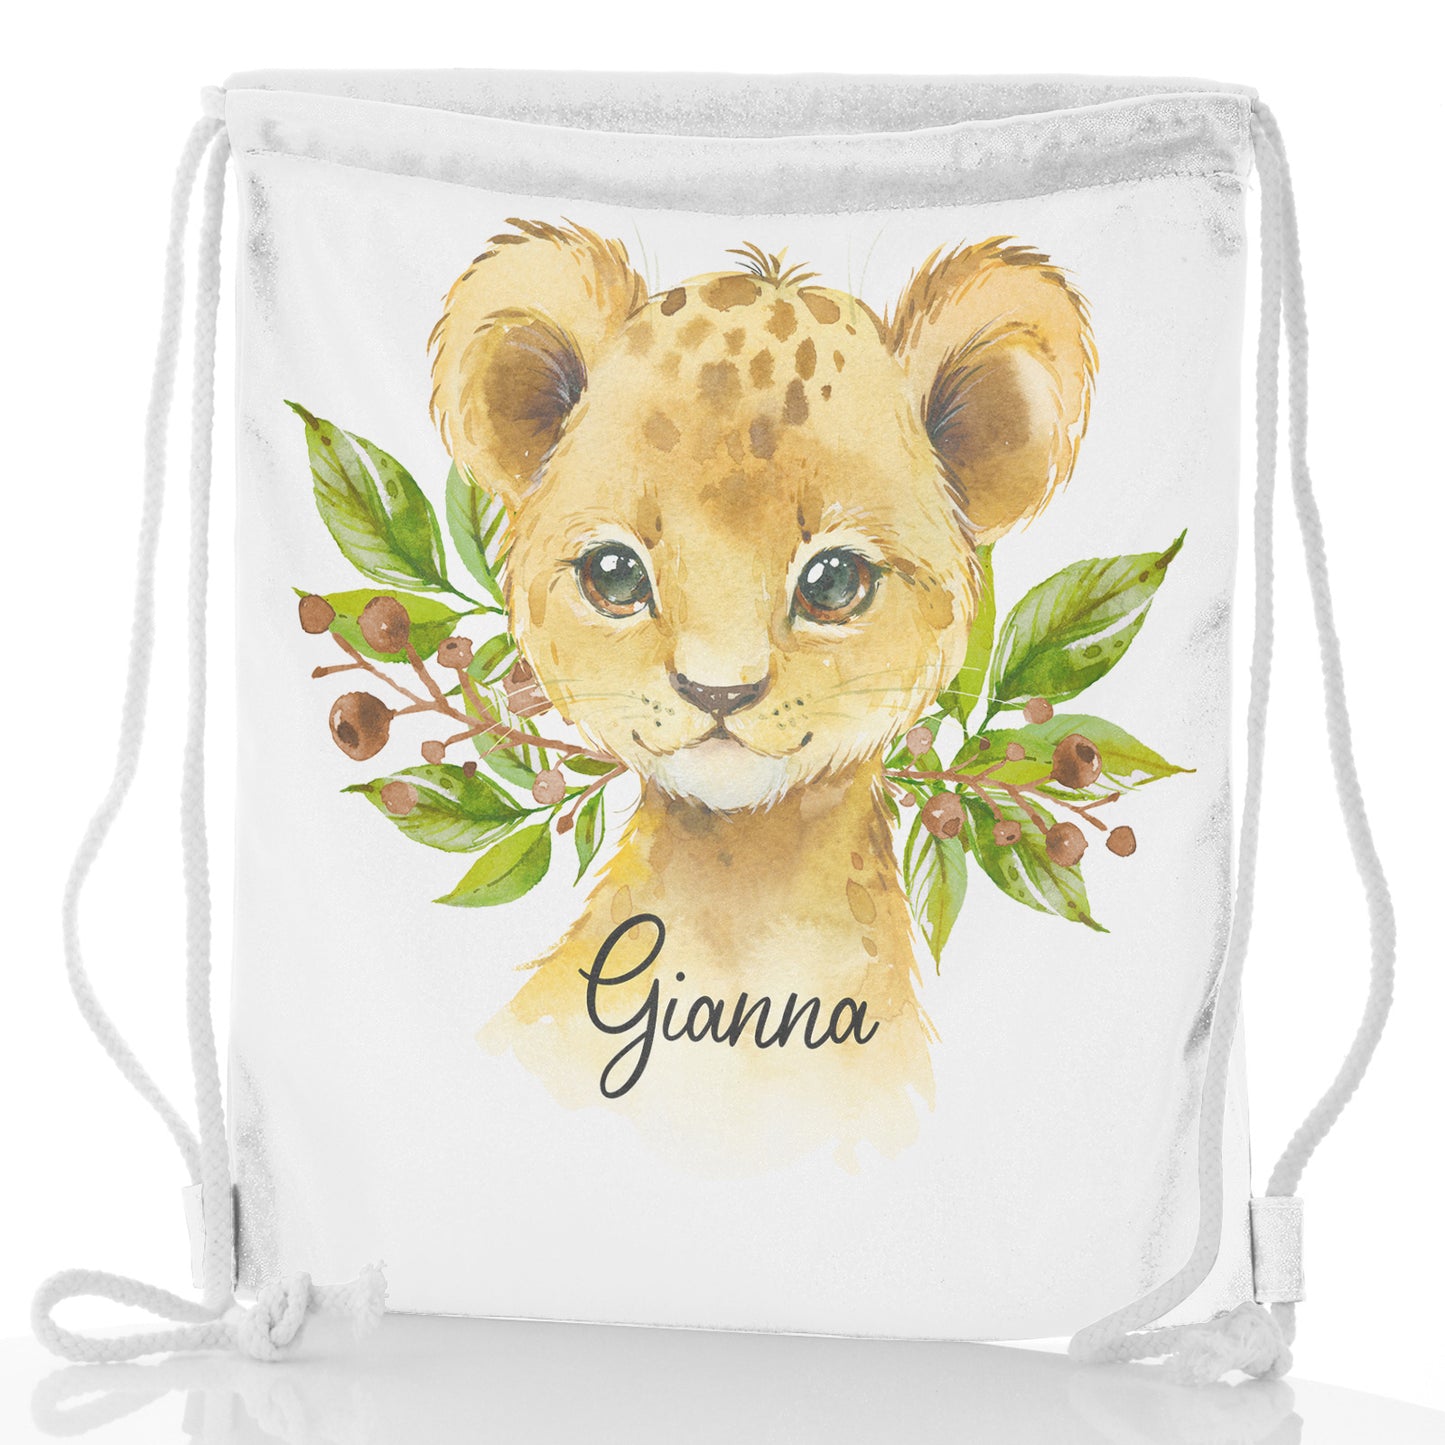 Personalised Glitter Drawstring Backpack with Lion Cub Olive Branch and Cute Text